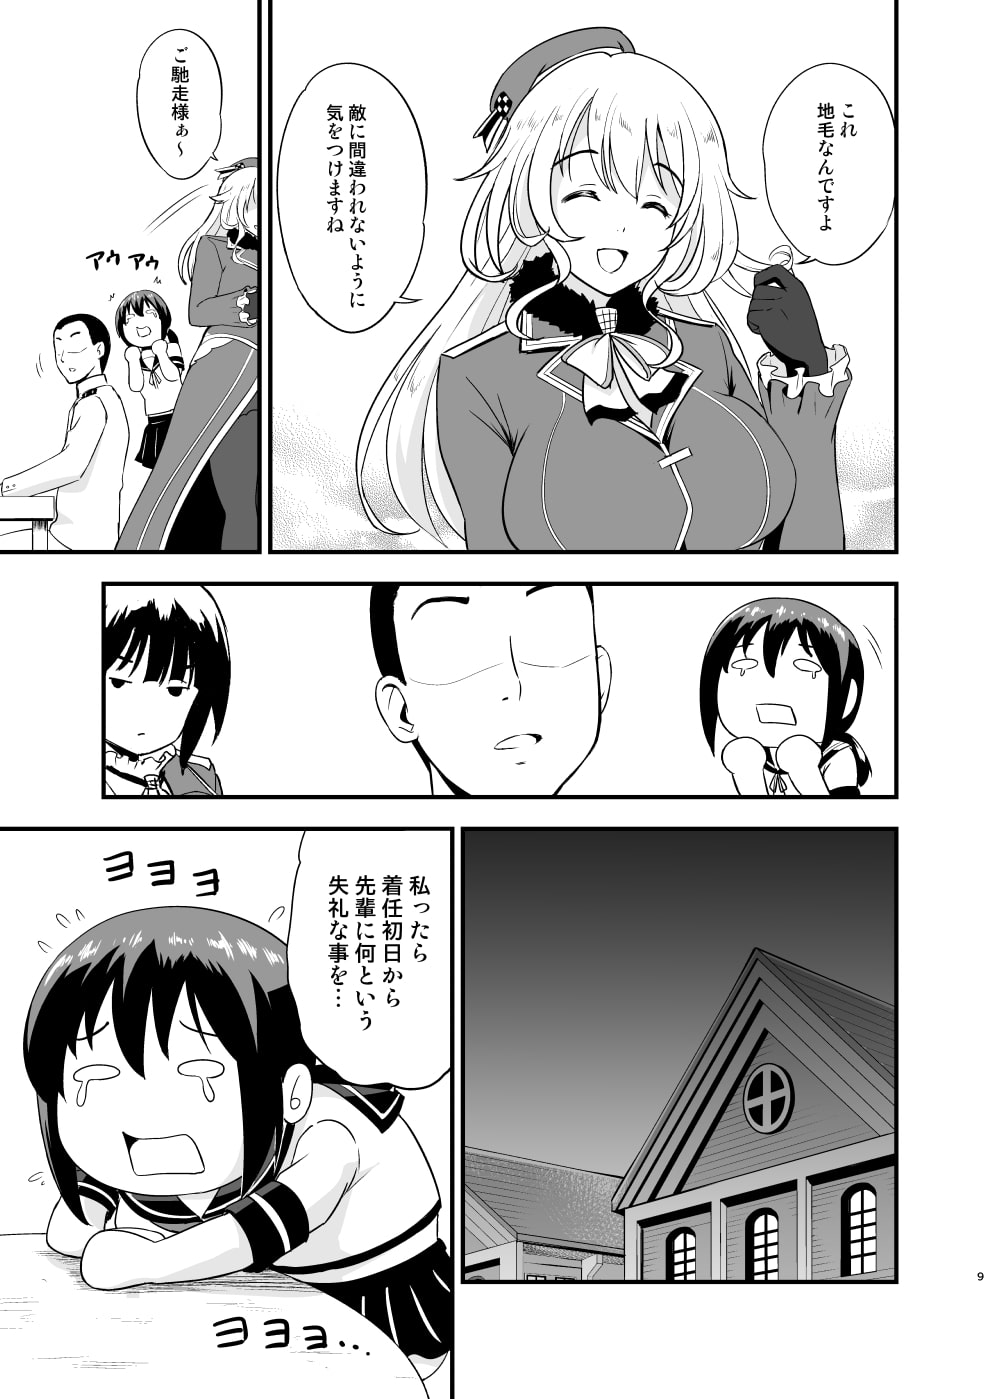 The reason why Atago became blond in her sisters.